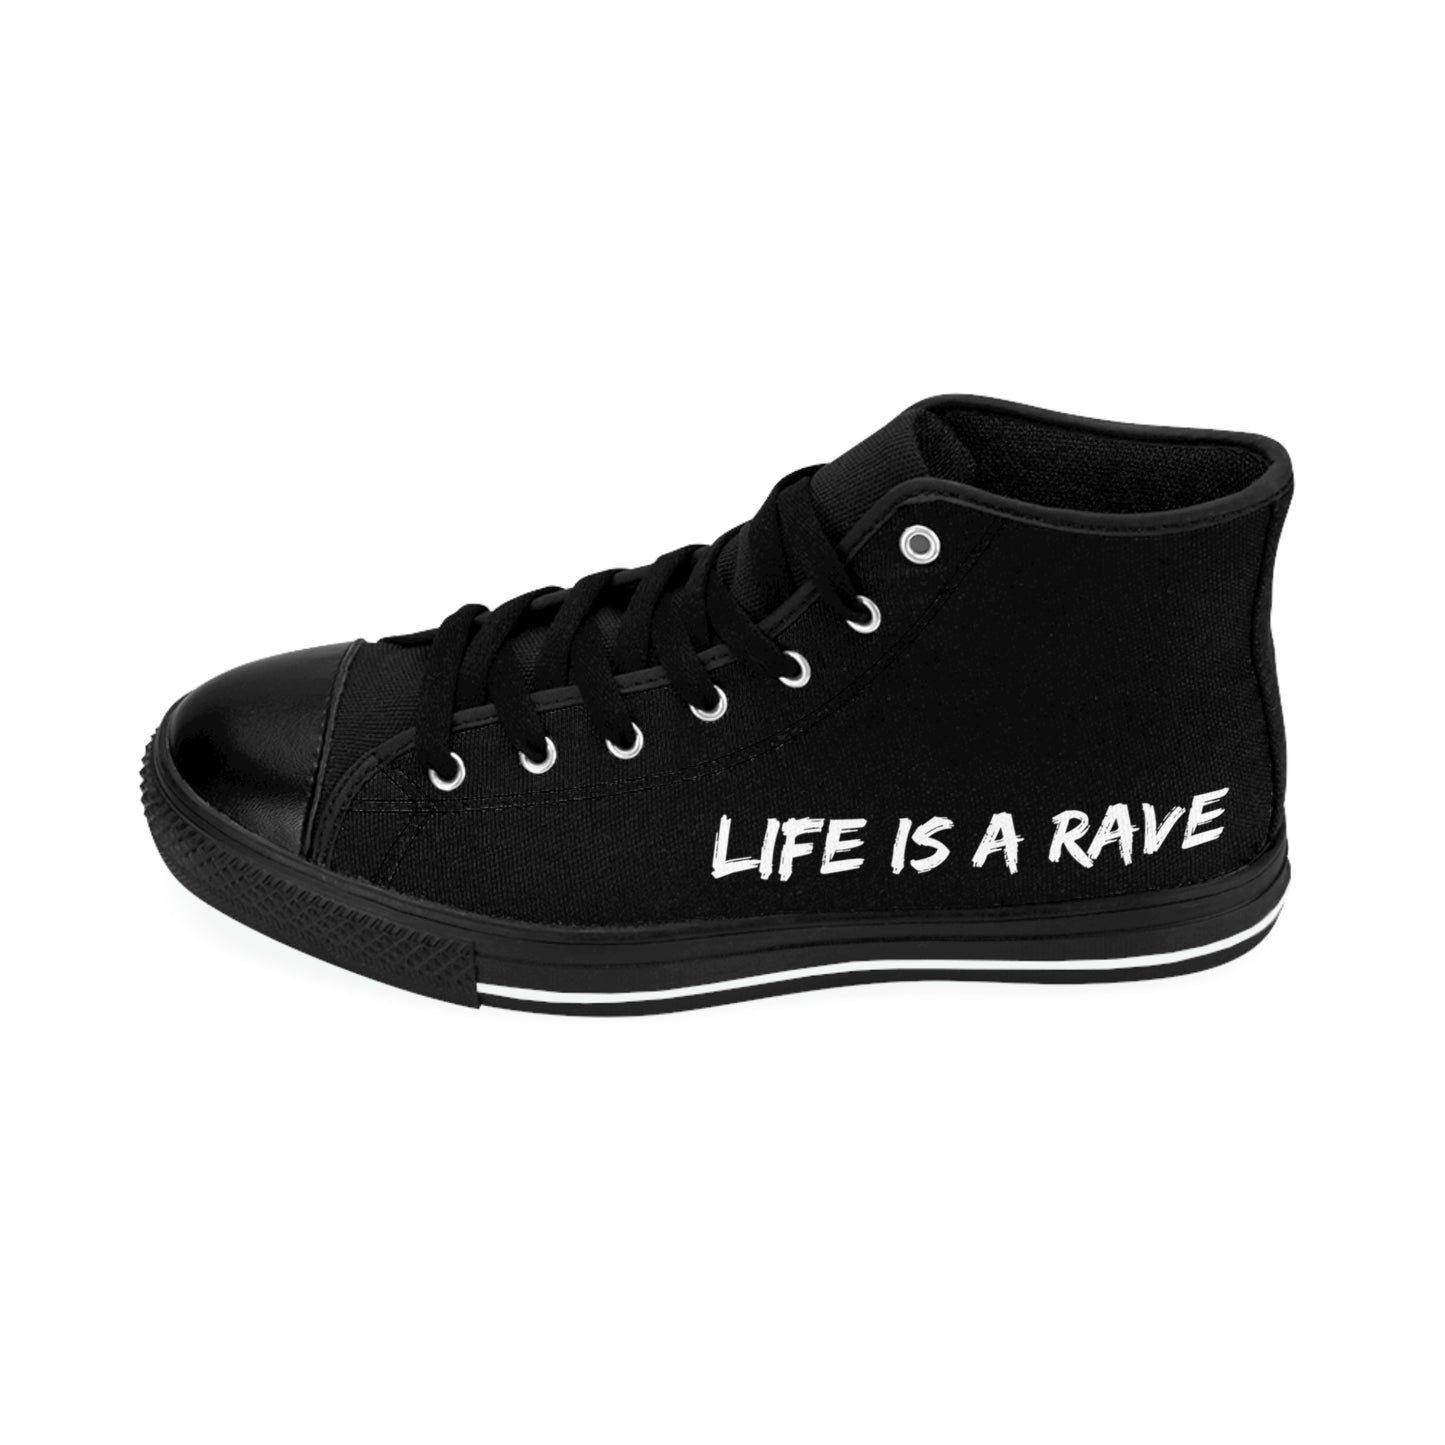 Life is a Rave - Men's High-Top Sneakers